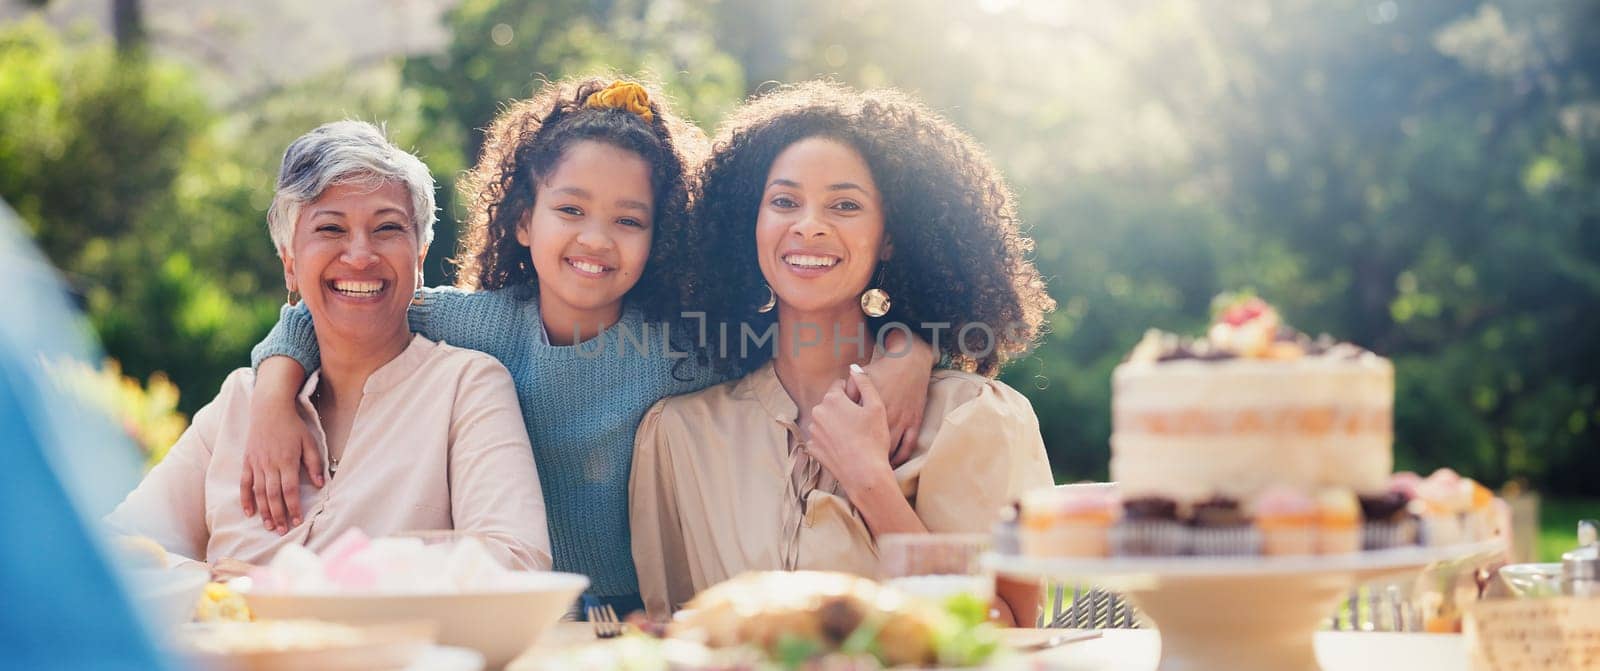 Family, hug and face at birthday party on table outdoor with mother, child and grandma with smile. Summer, event and celebration with love, support and girl in garden with generation of women or moth.